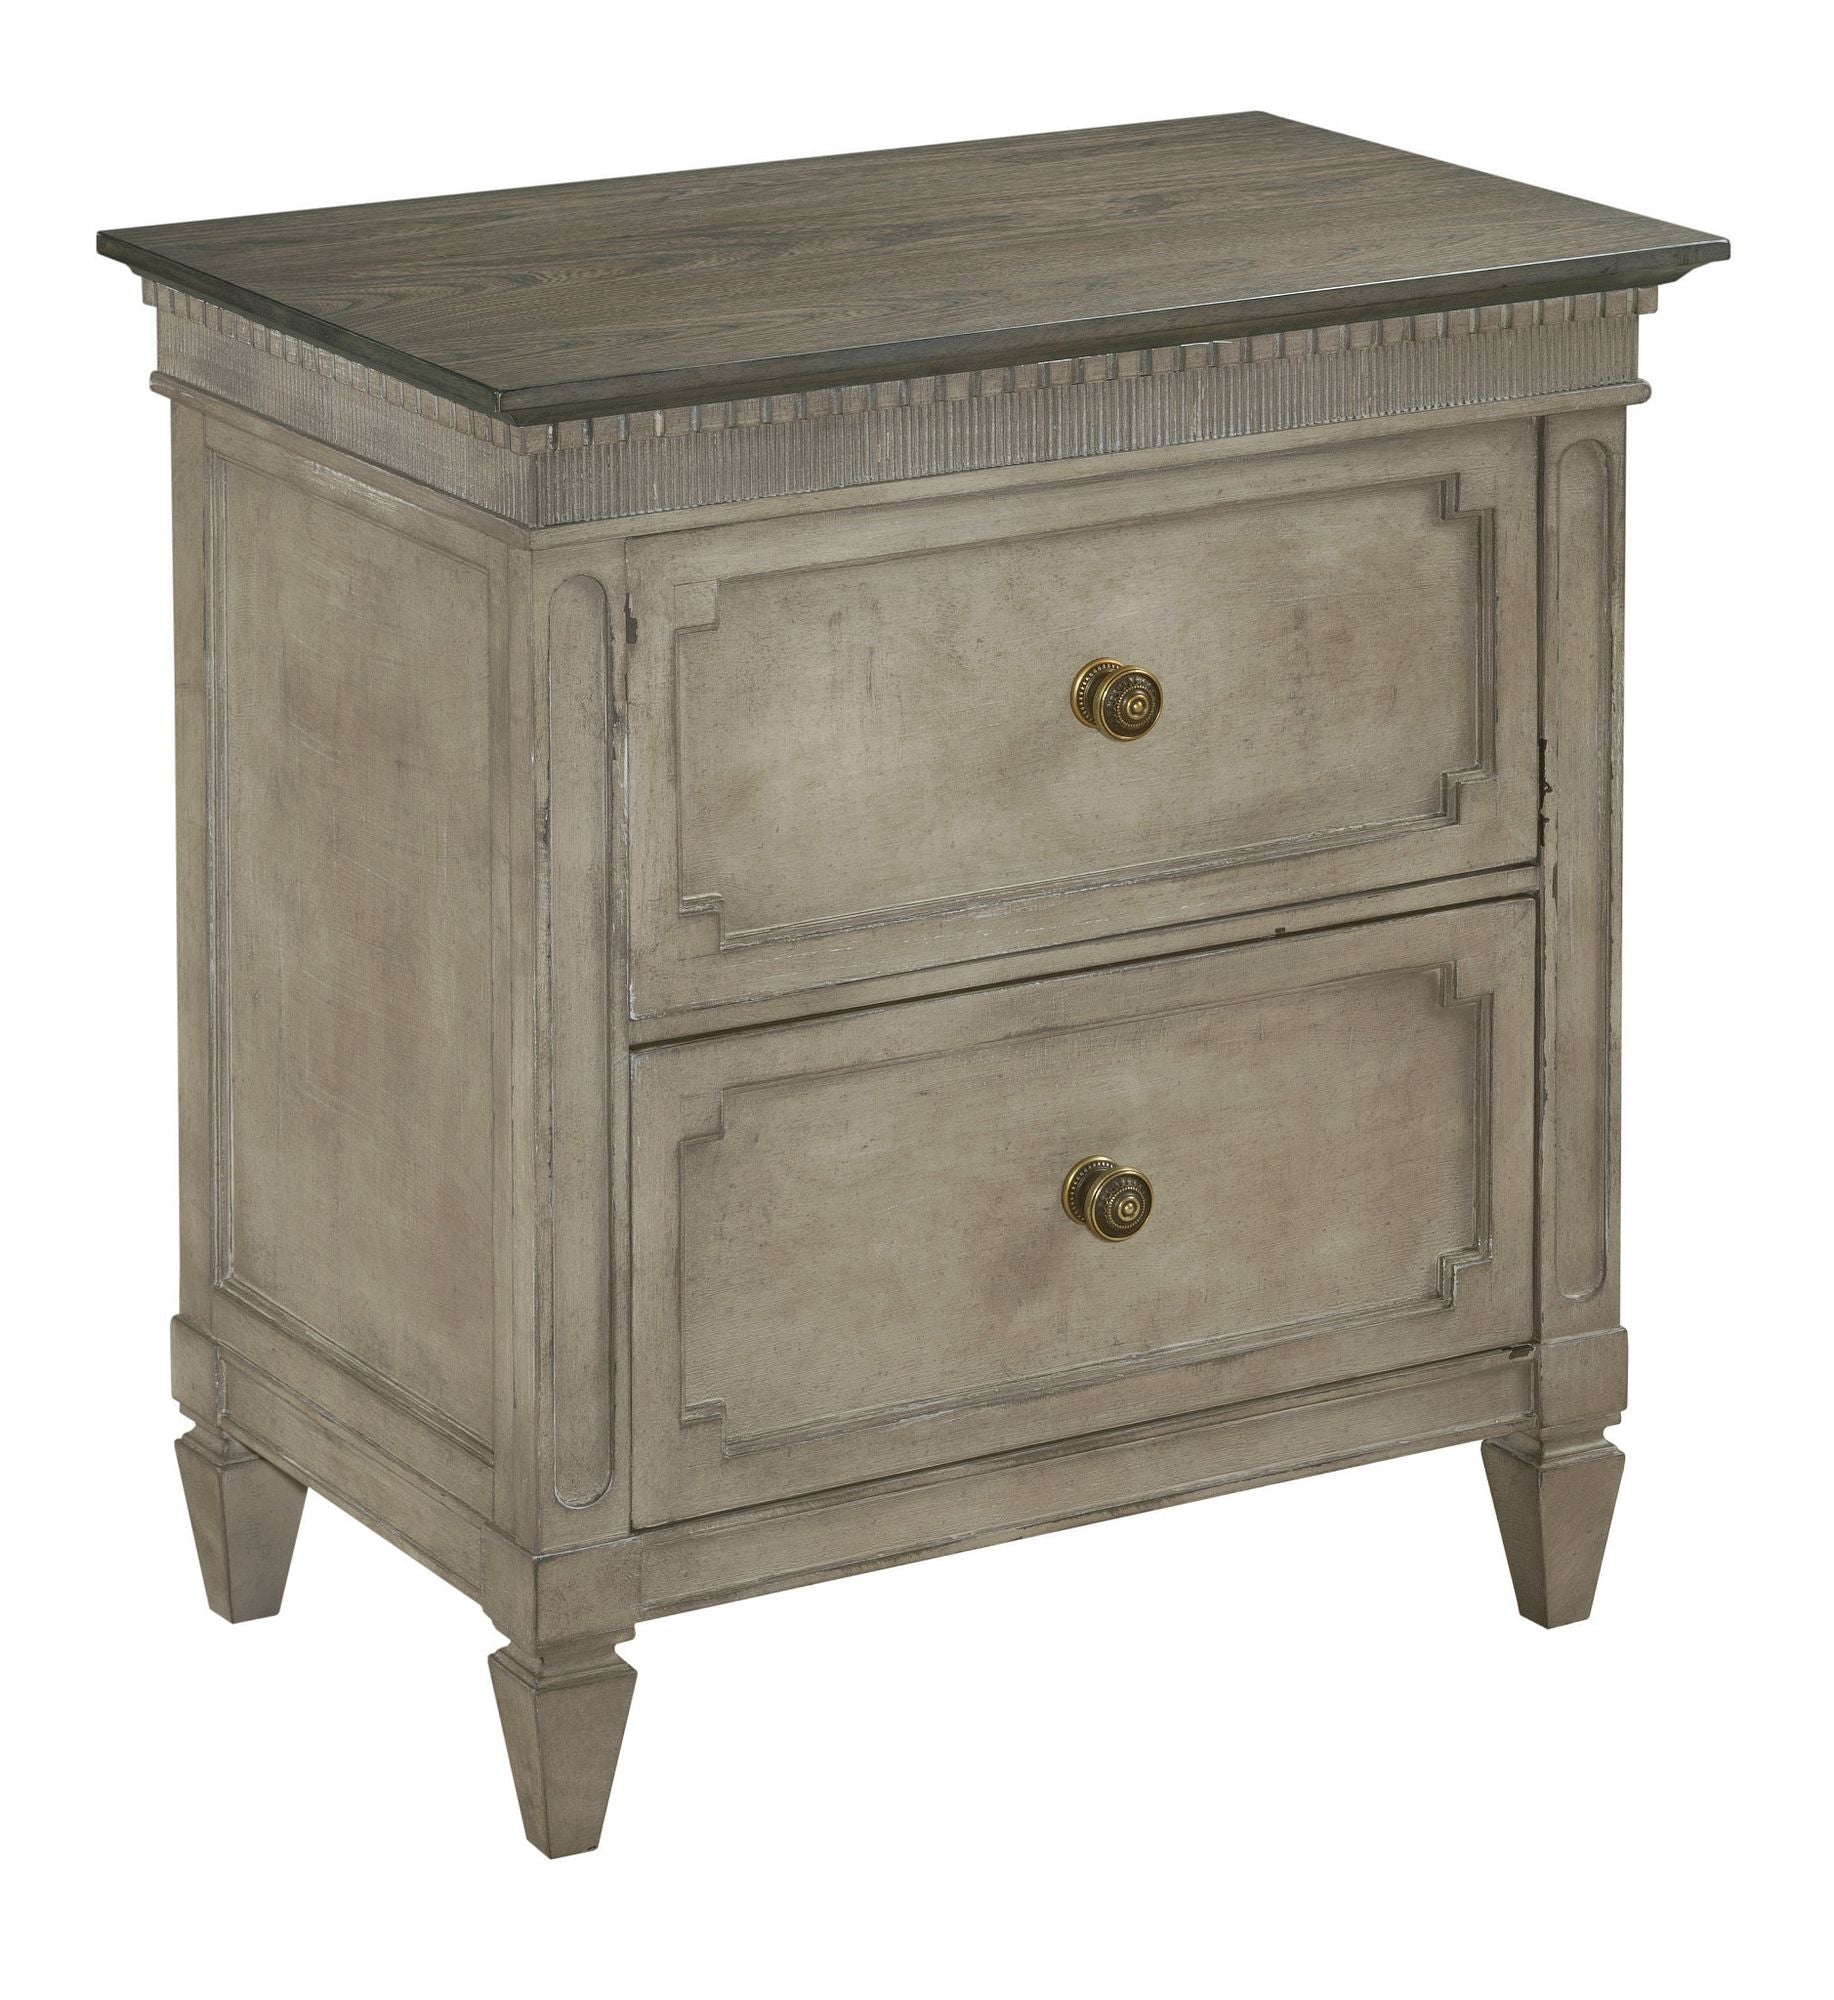 AX TWO DRAWER NIGHTSTAND